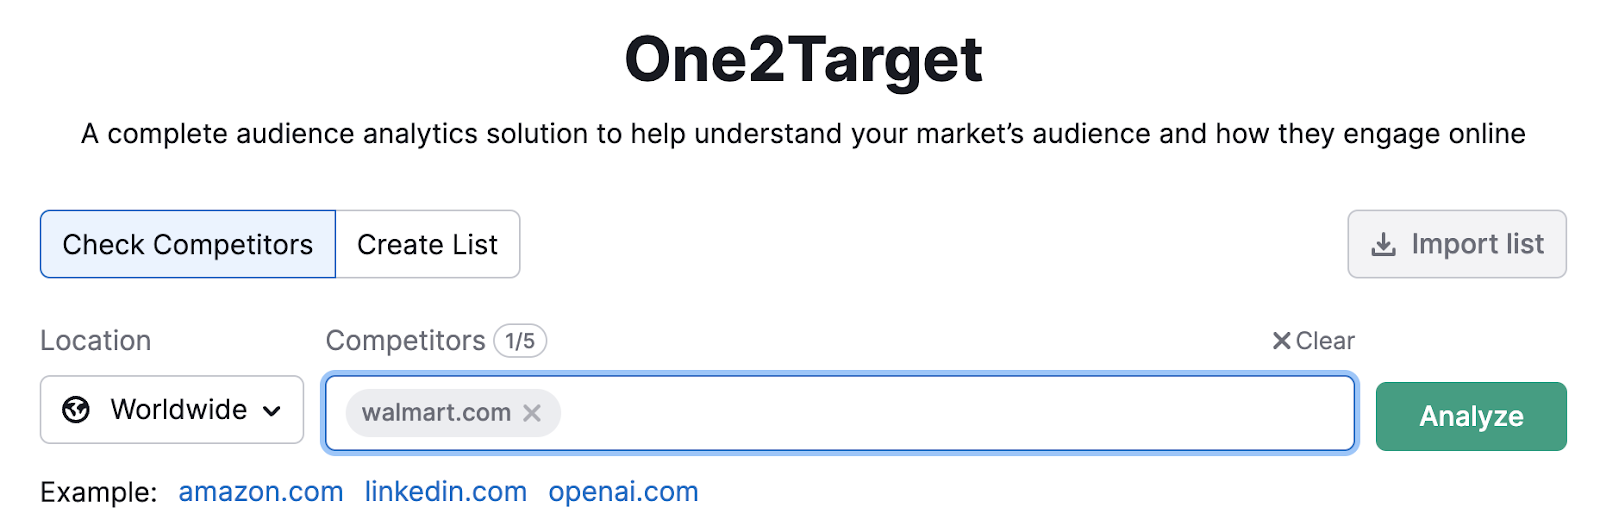 "walmart.com" entered into the One2Target tool